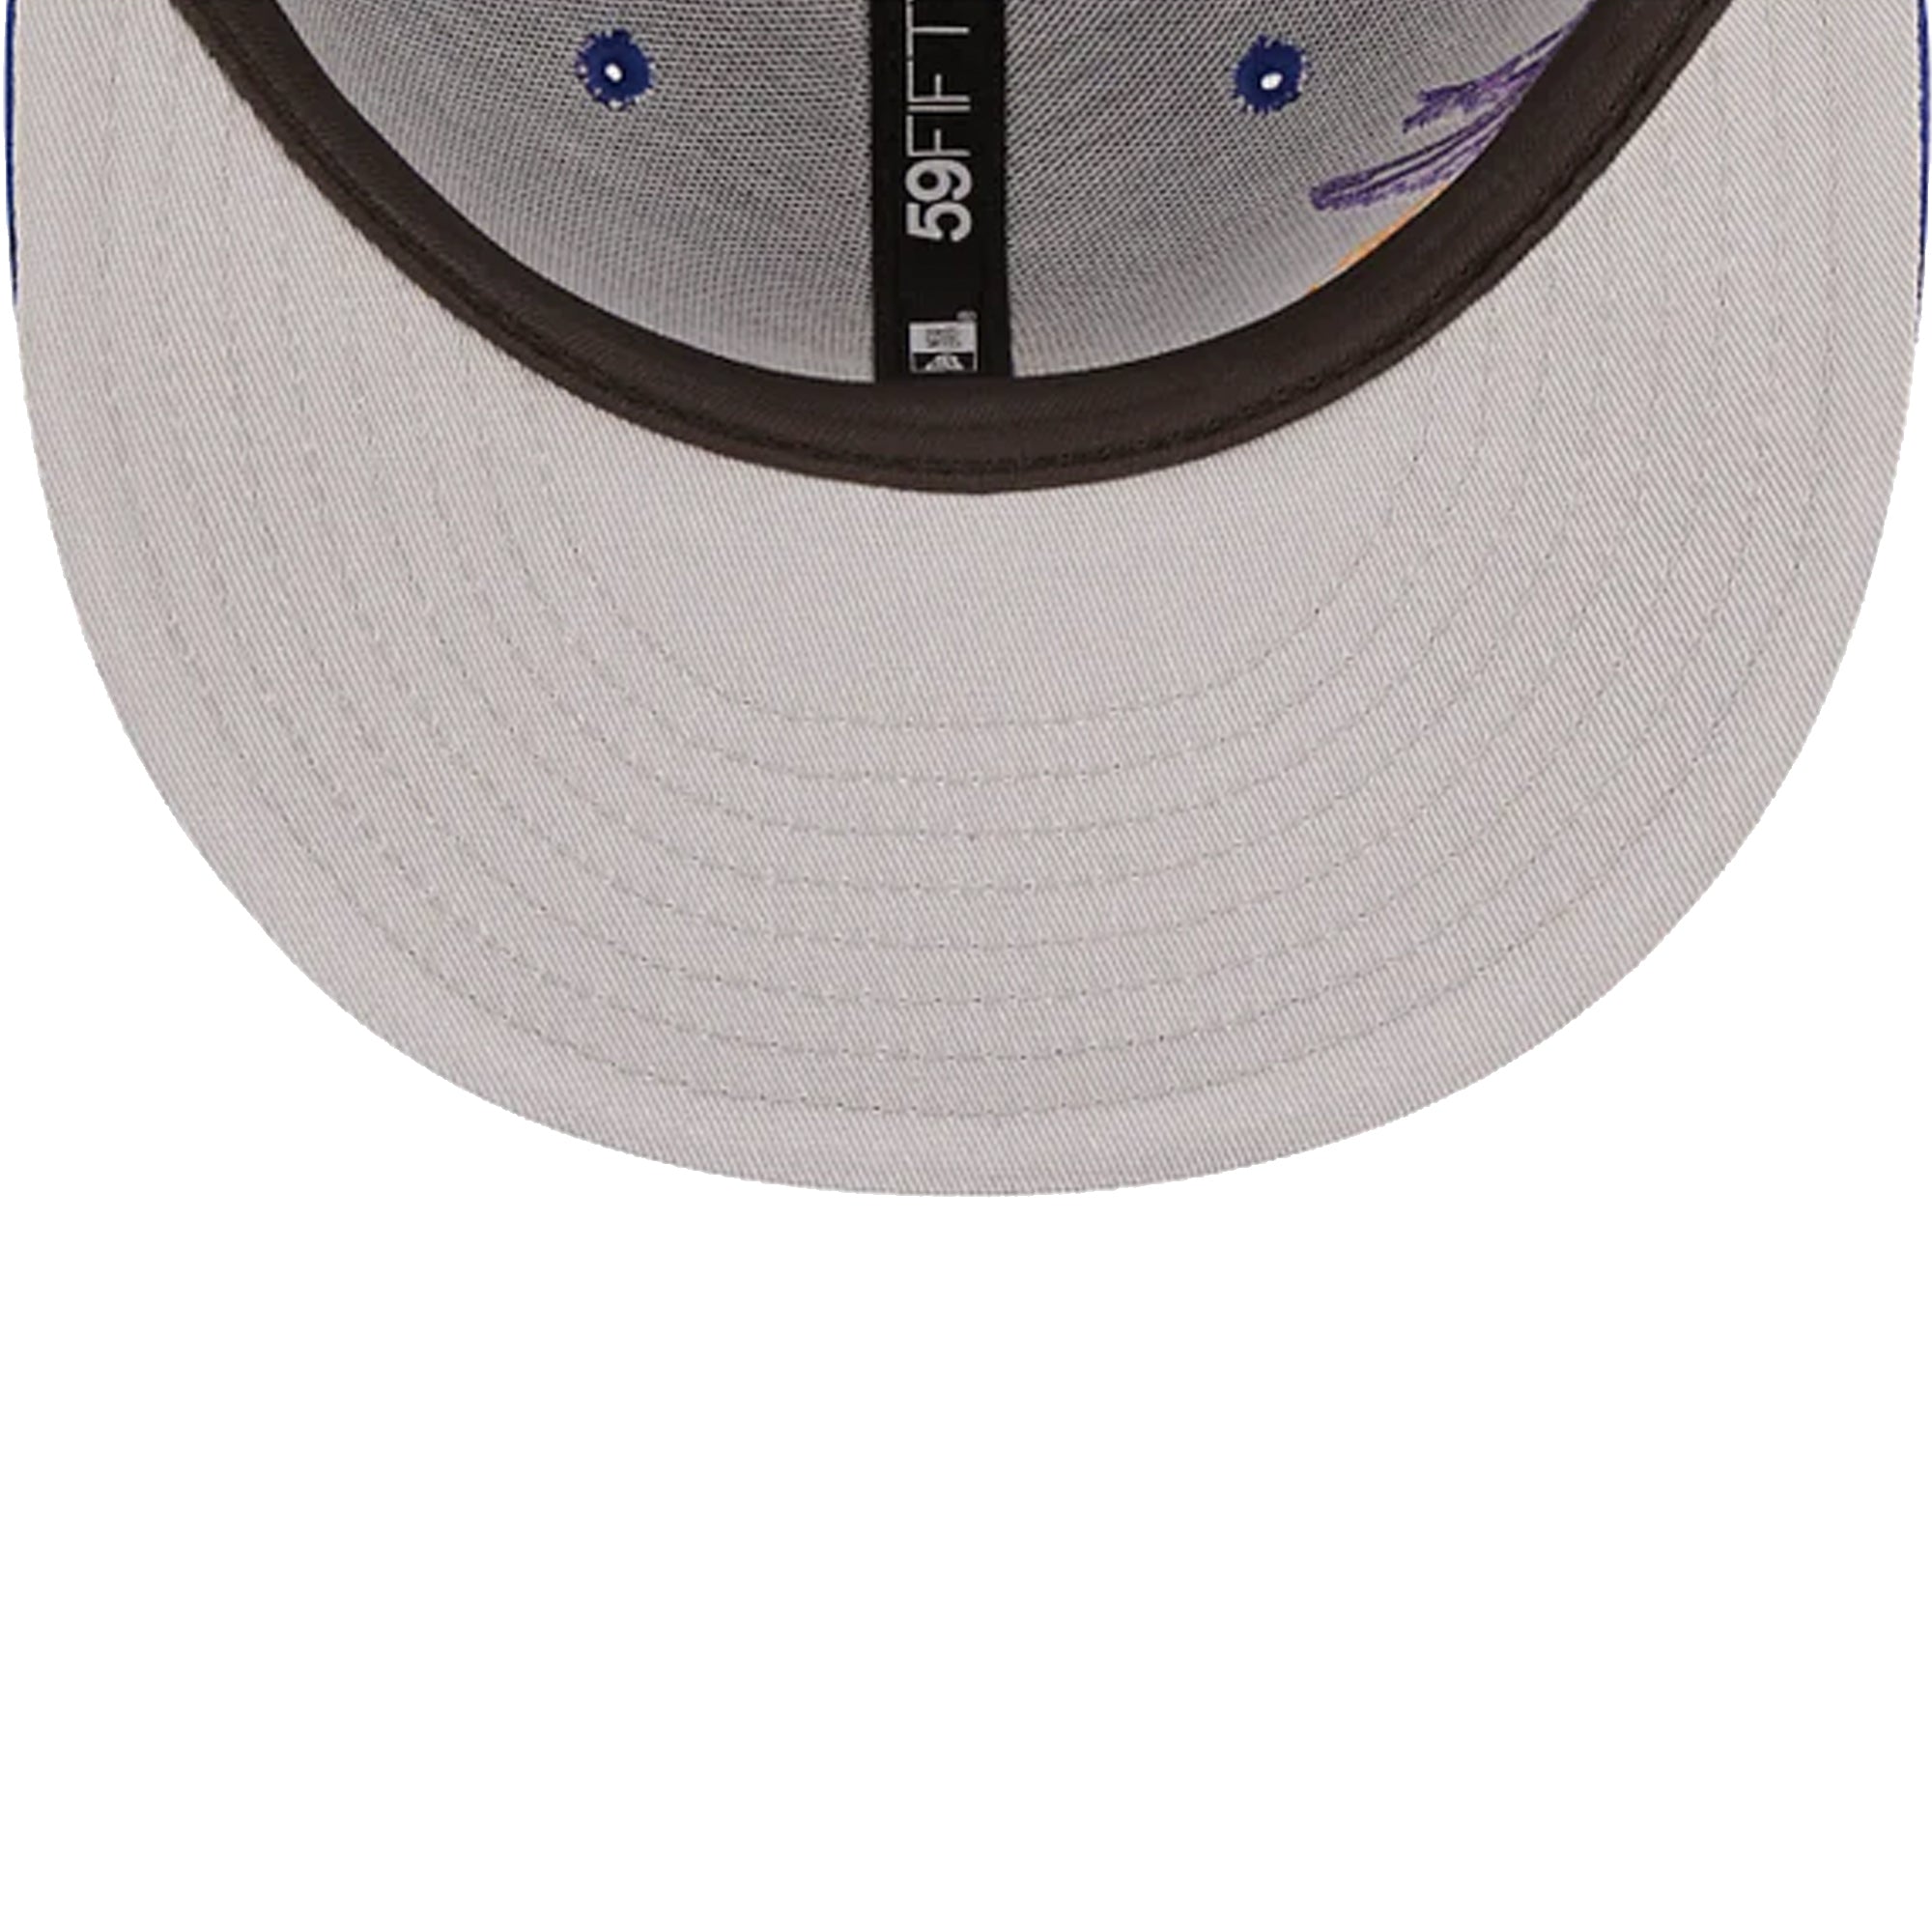 Chicago Cubs New Era 59Fifty Fitted Hat (Air Jordan RETRO 6 Black